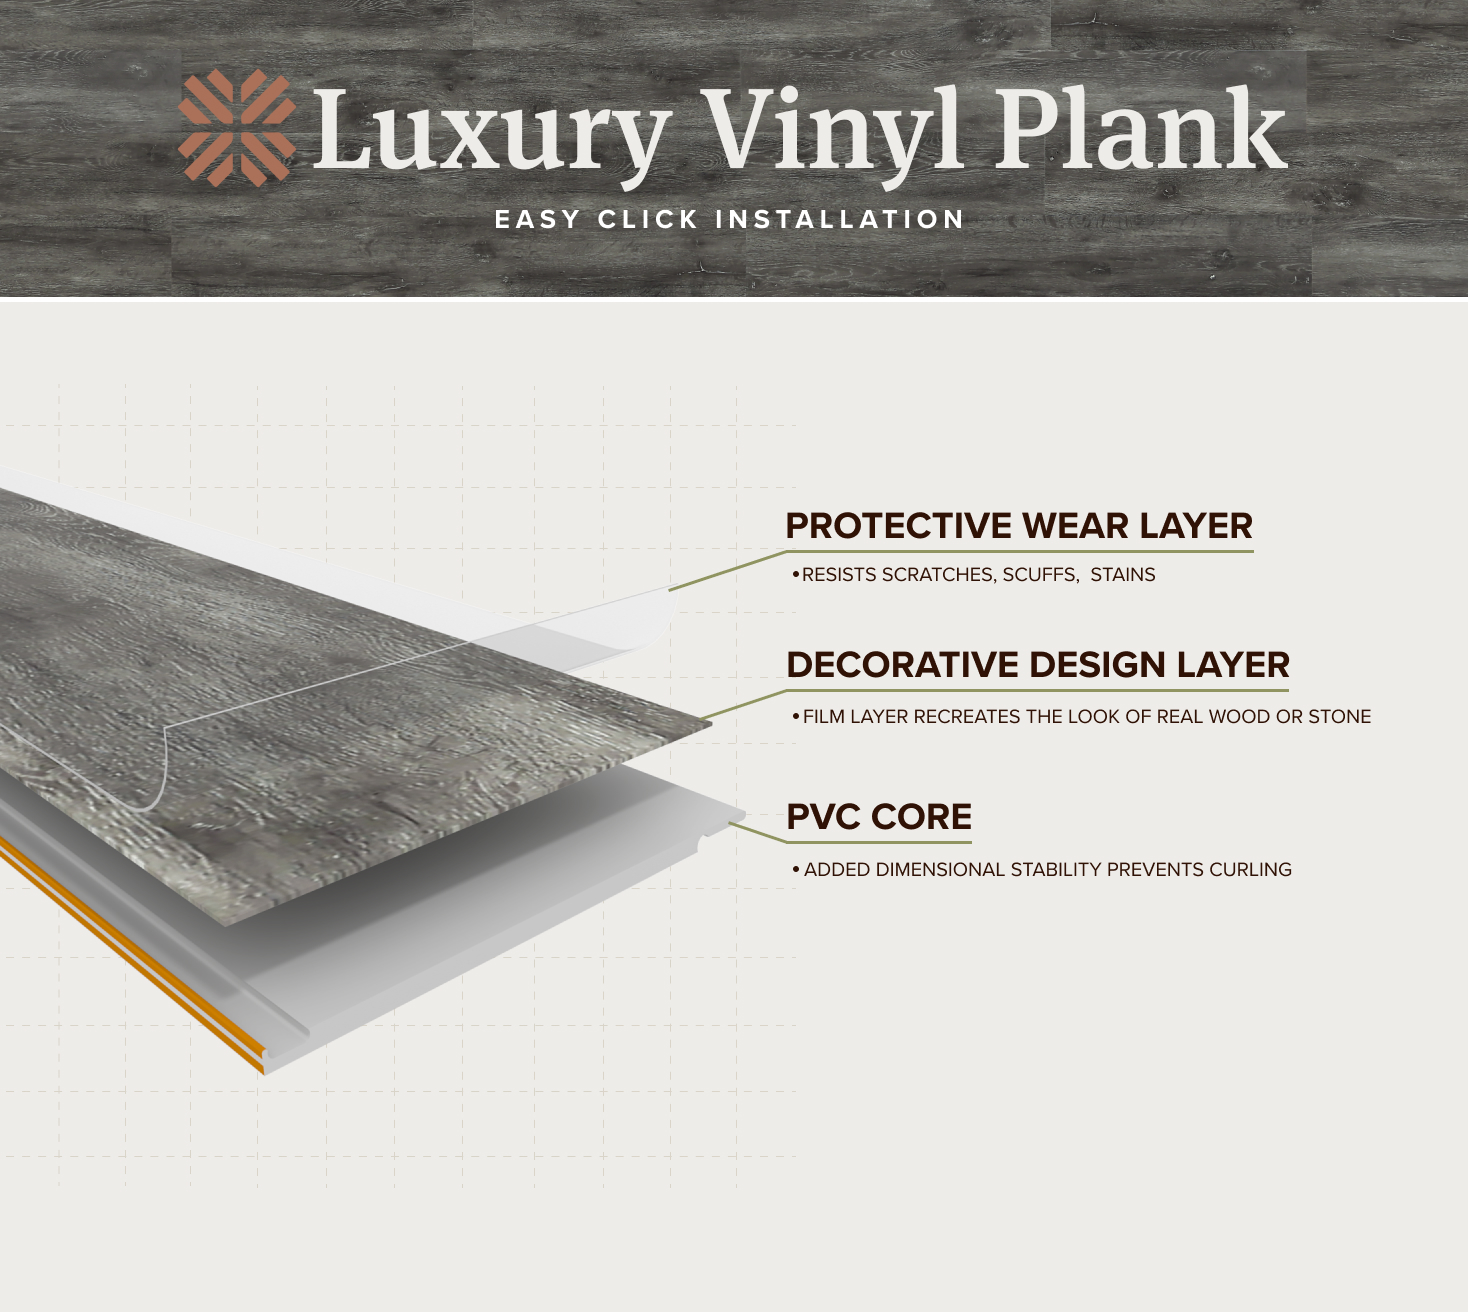 graphic showing layers of luxury vinyl plank